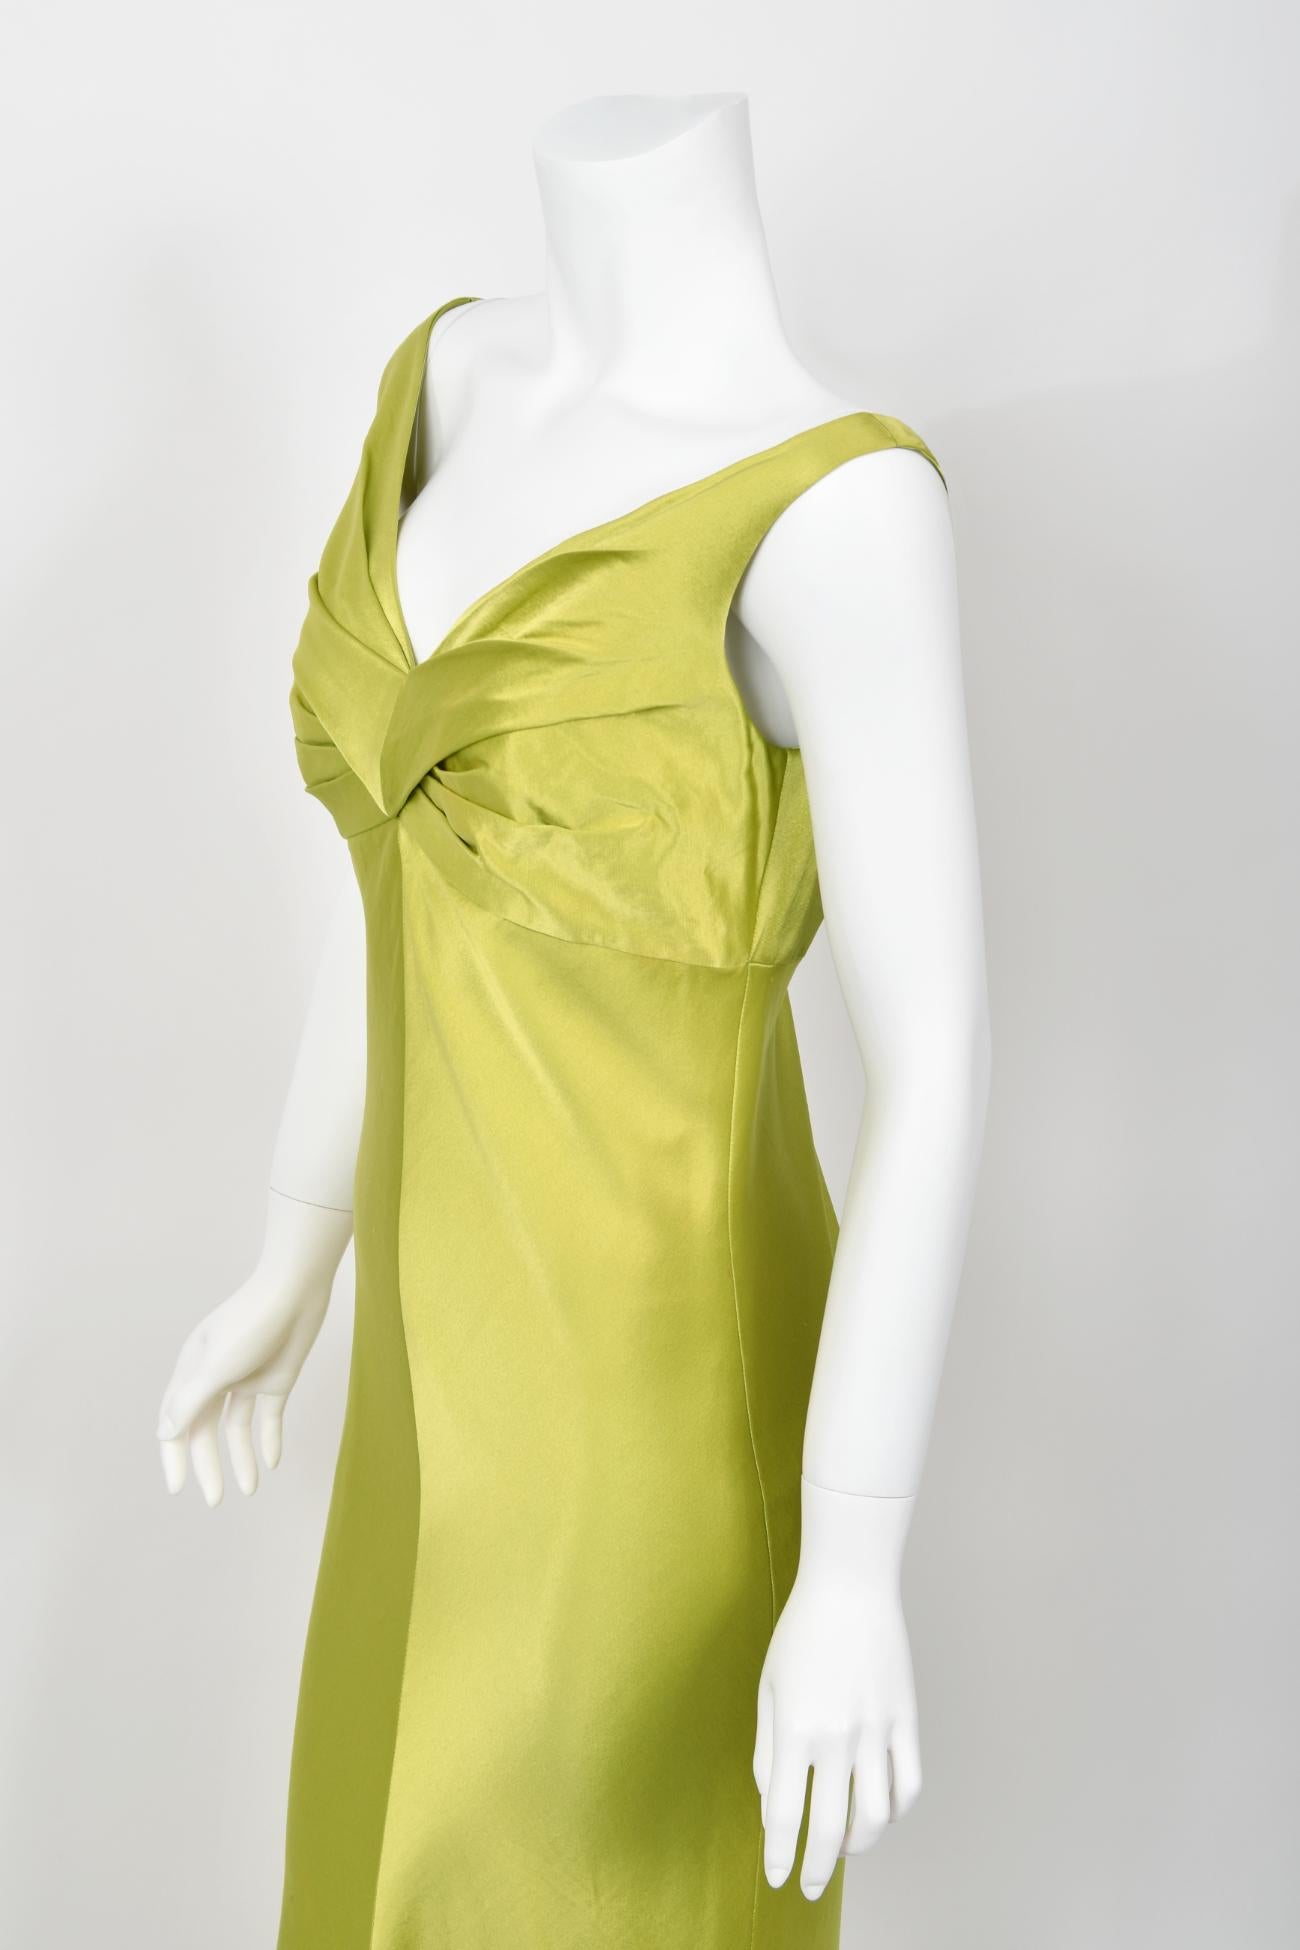 1995 Gianni Versace Couture Documented Runway Chartreuse Silk Off-Shoulder Gown For Sale 10